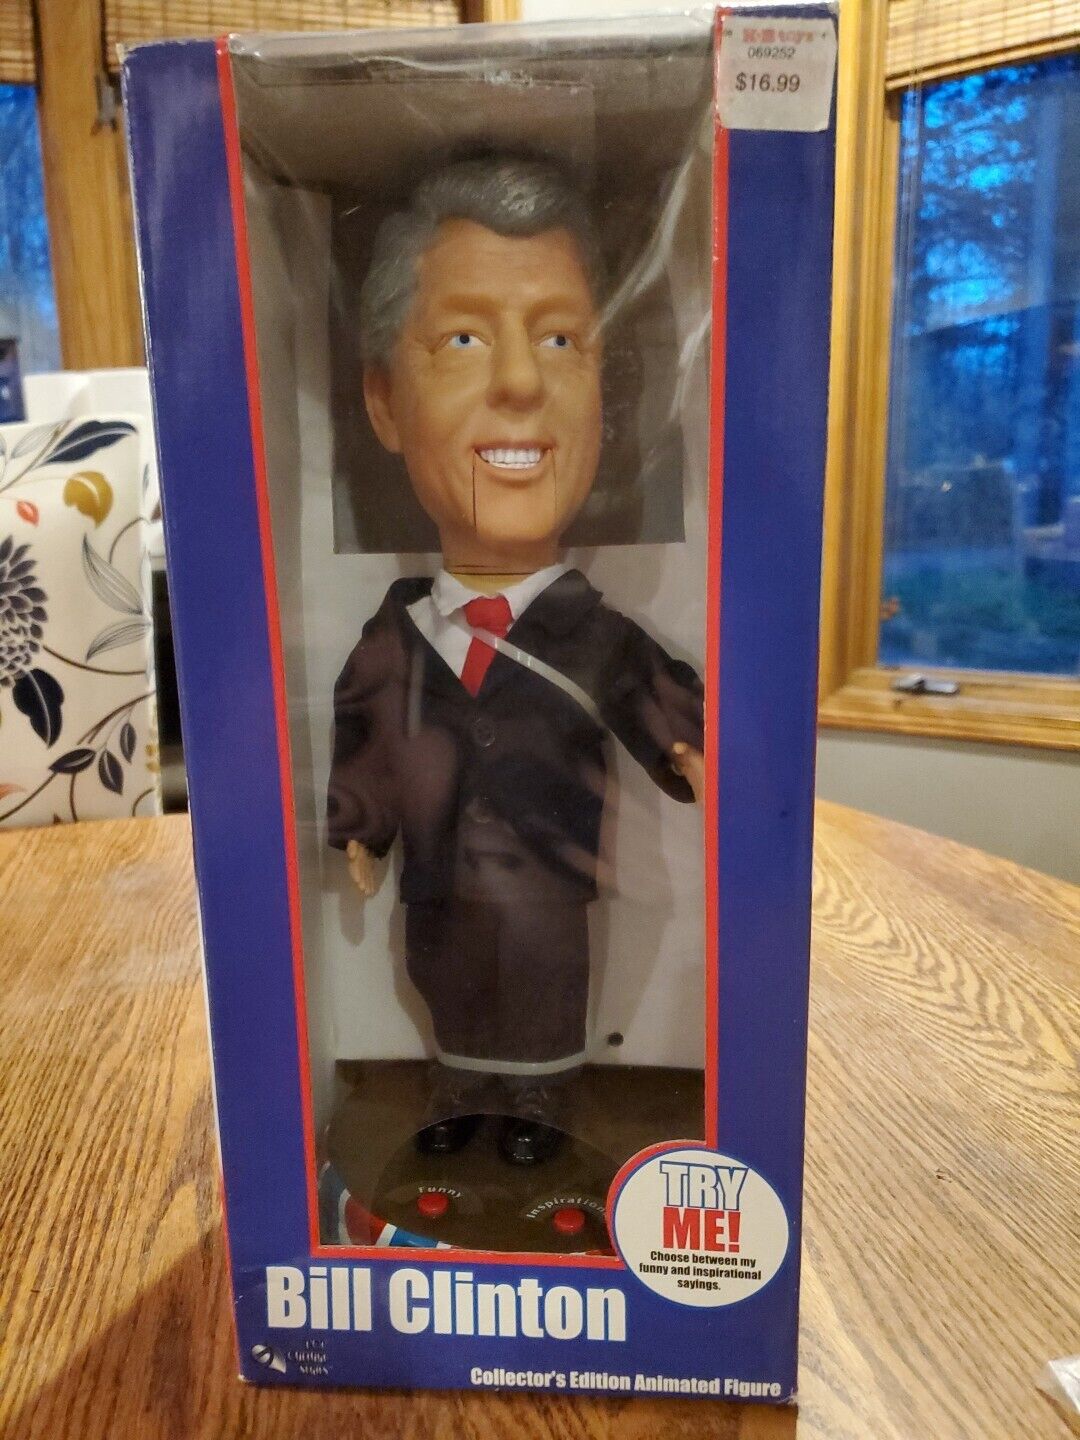 2004 Bill Clinton Talking Gemmy Doll Collector's Edition Animated Figure Vintage